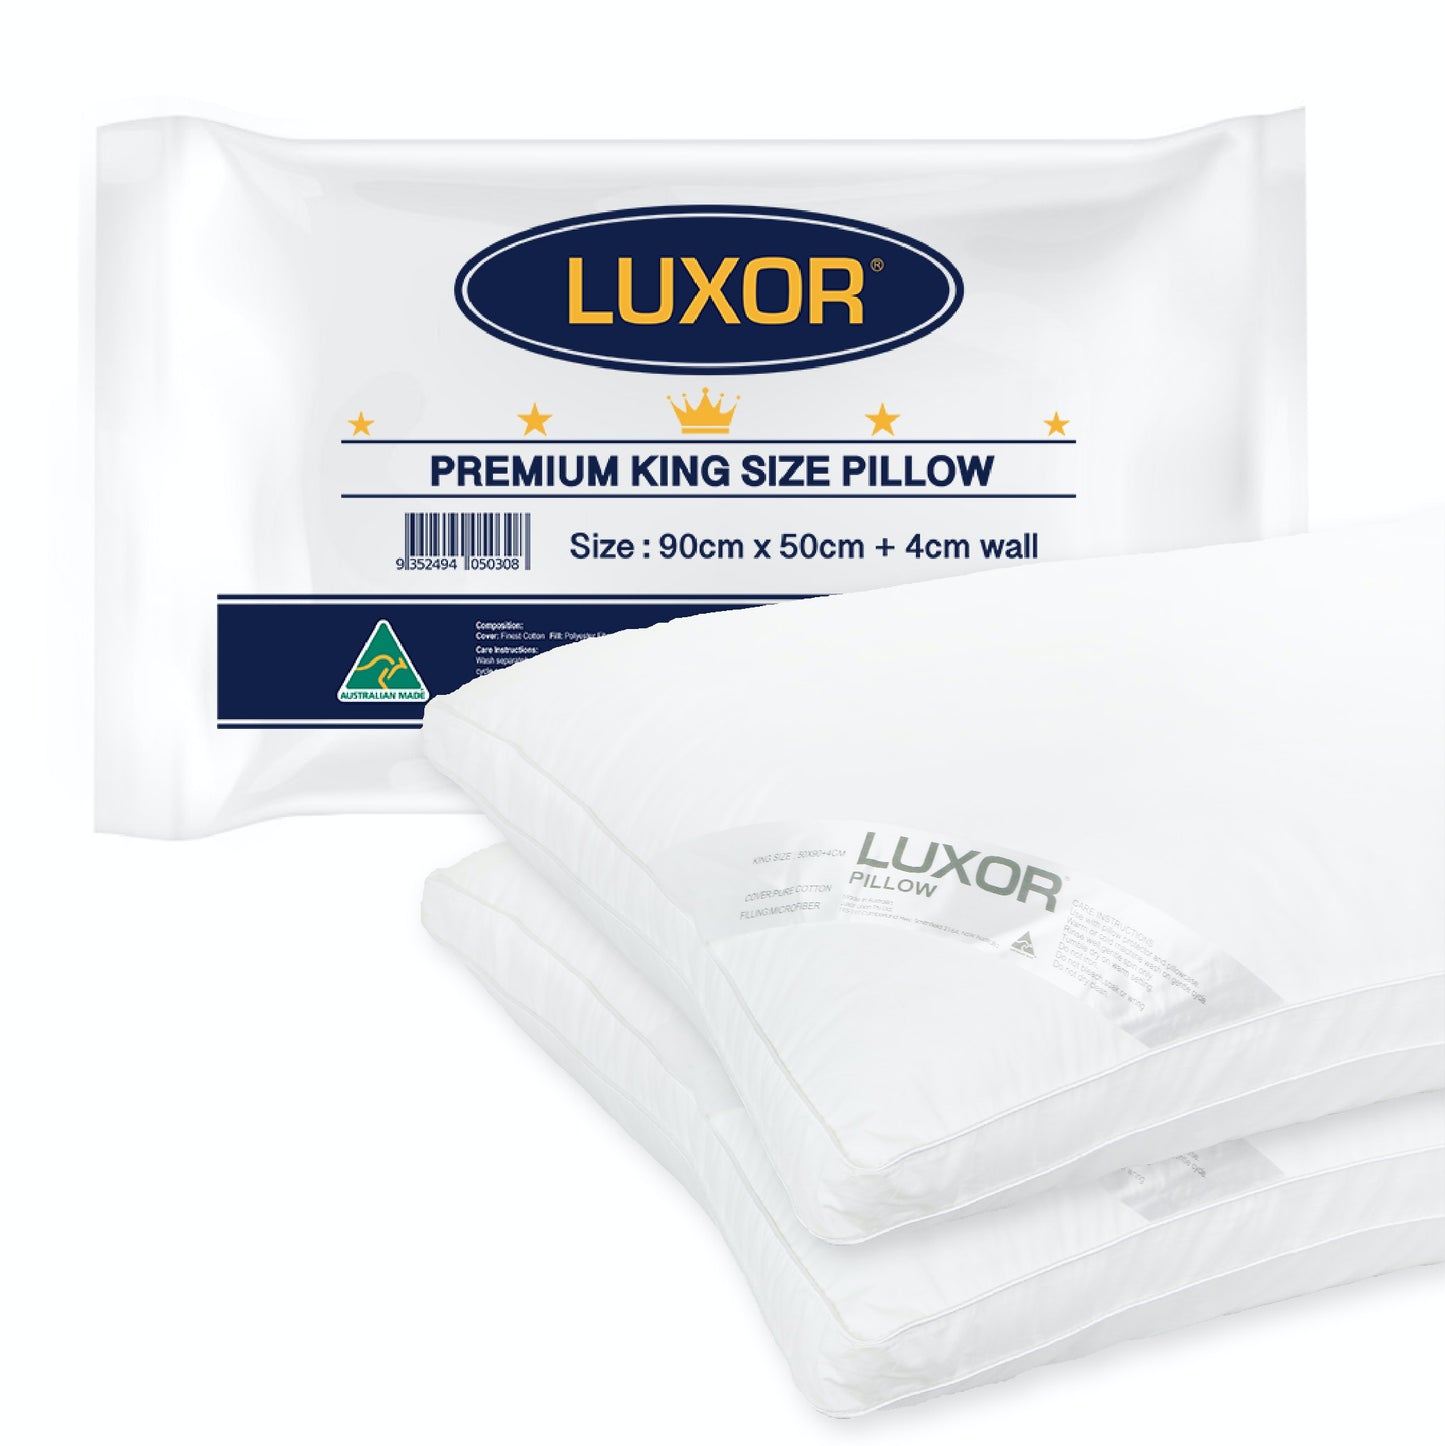 Luxor Australian Made Hotel - King Size Pillow with 4cm Wall  - 1 Pack, 2 Pack, 4 Pack